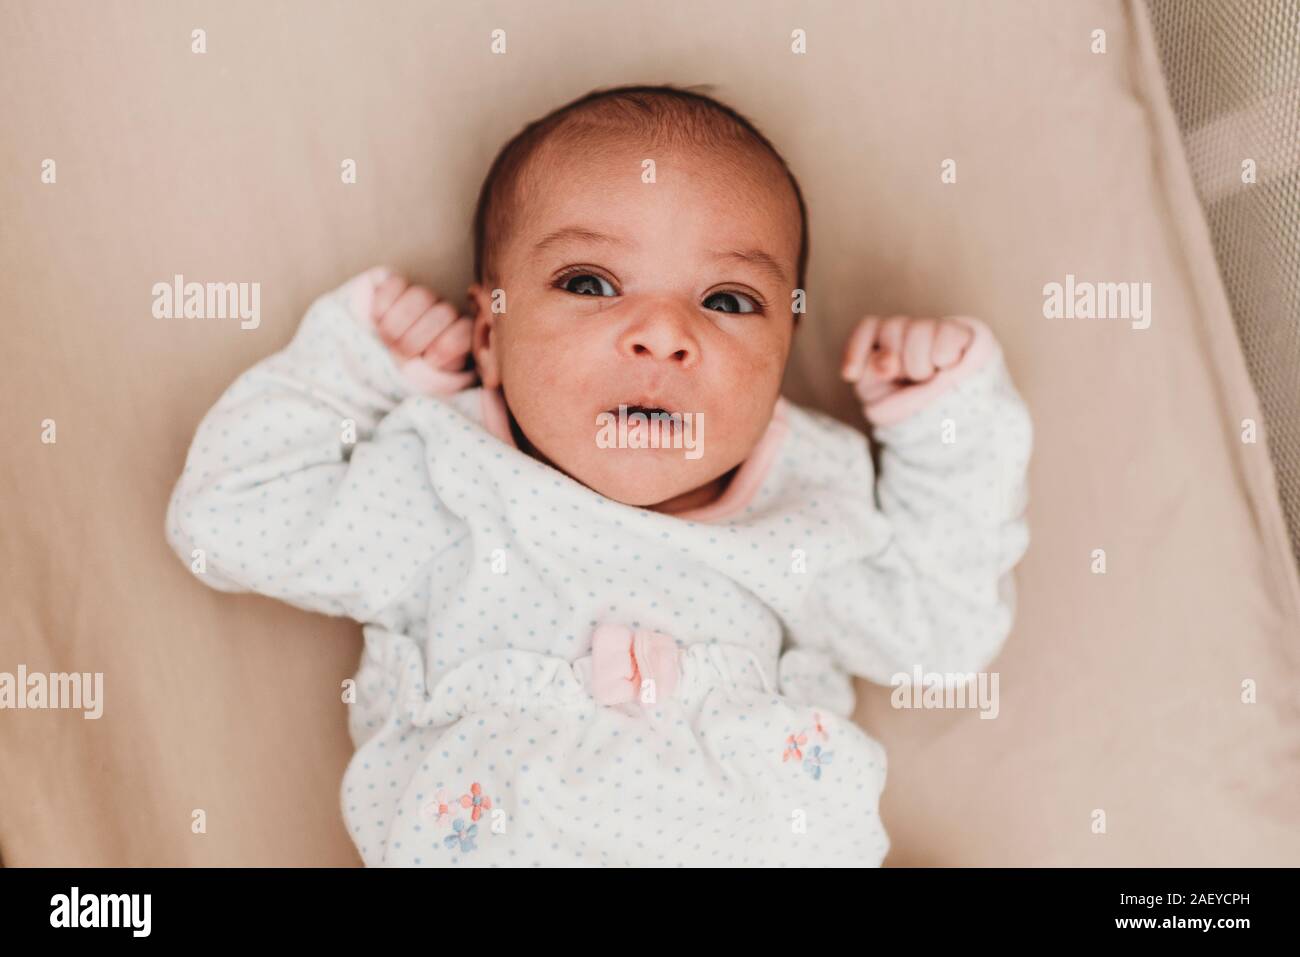 Dark-haired month old baby with wide open eyes lying in crib Stock Photo